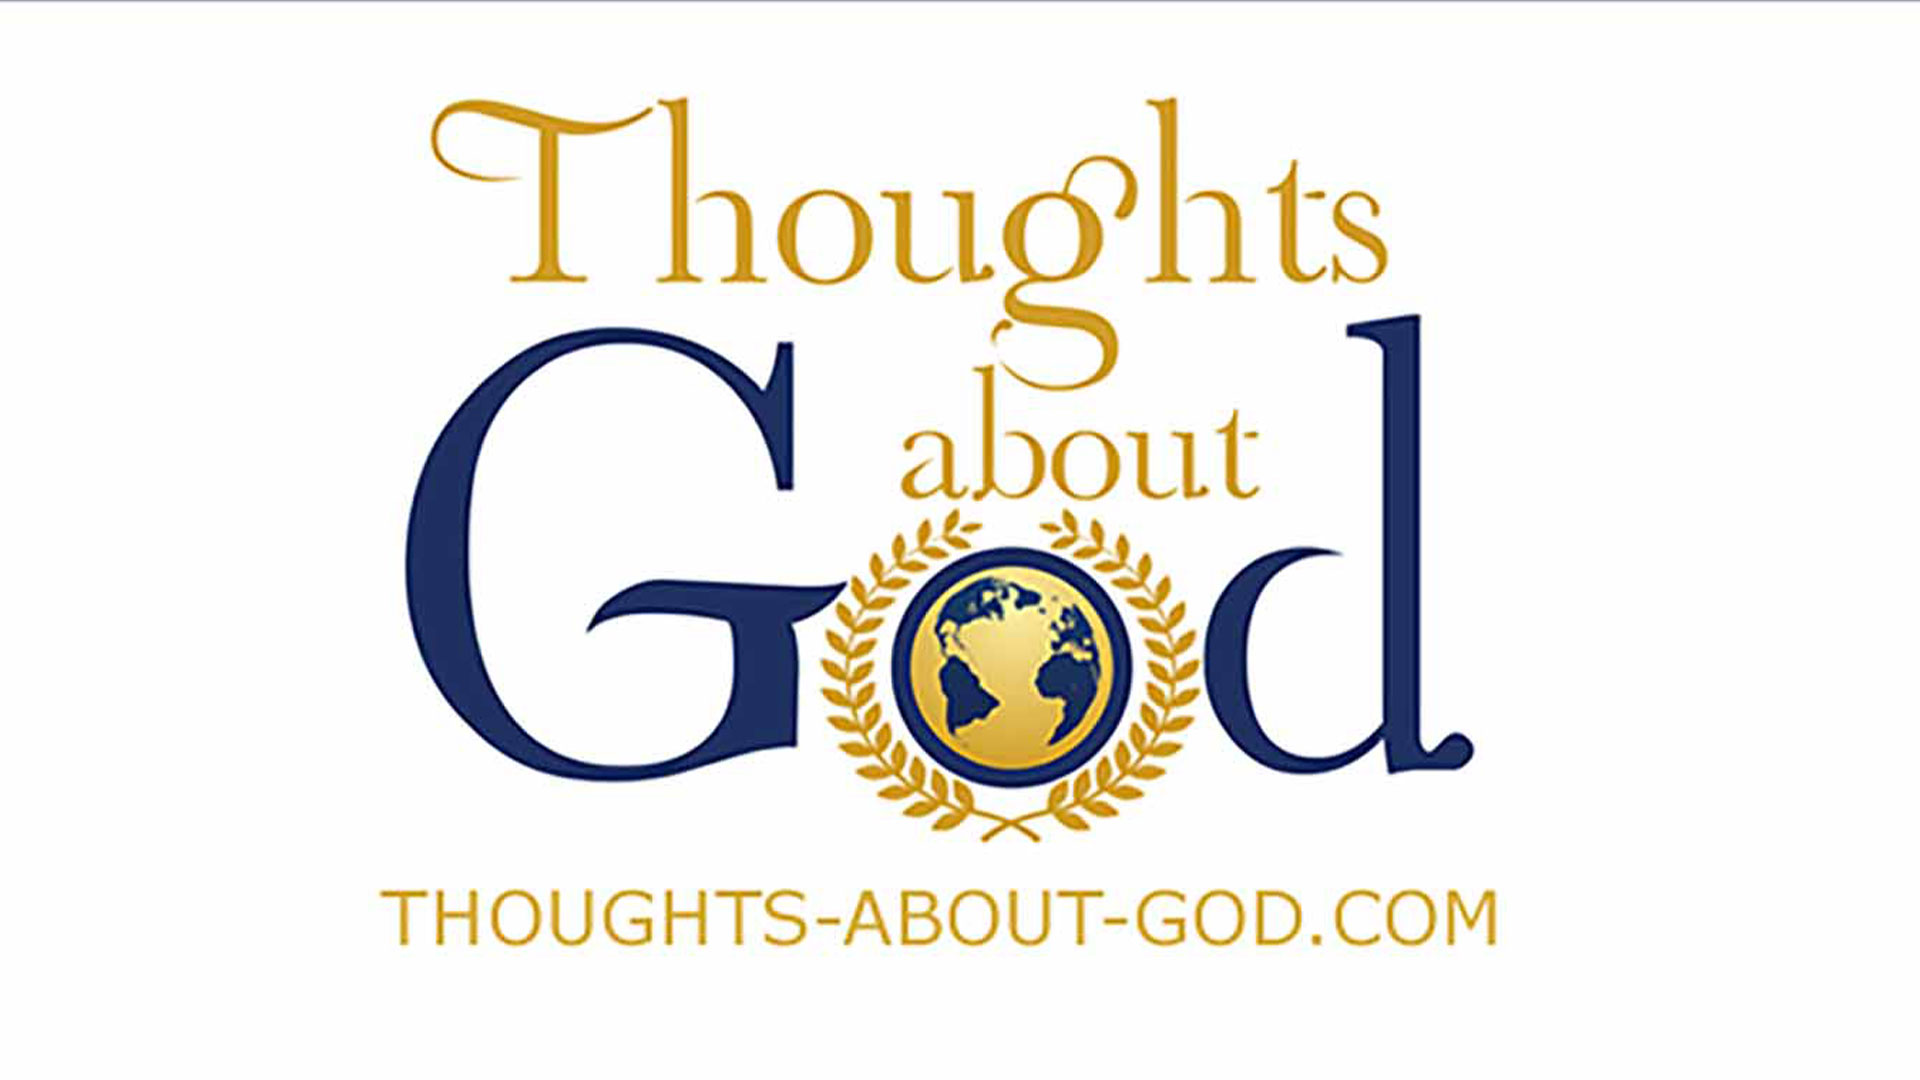 Thoughts About God logo